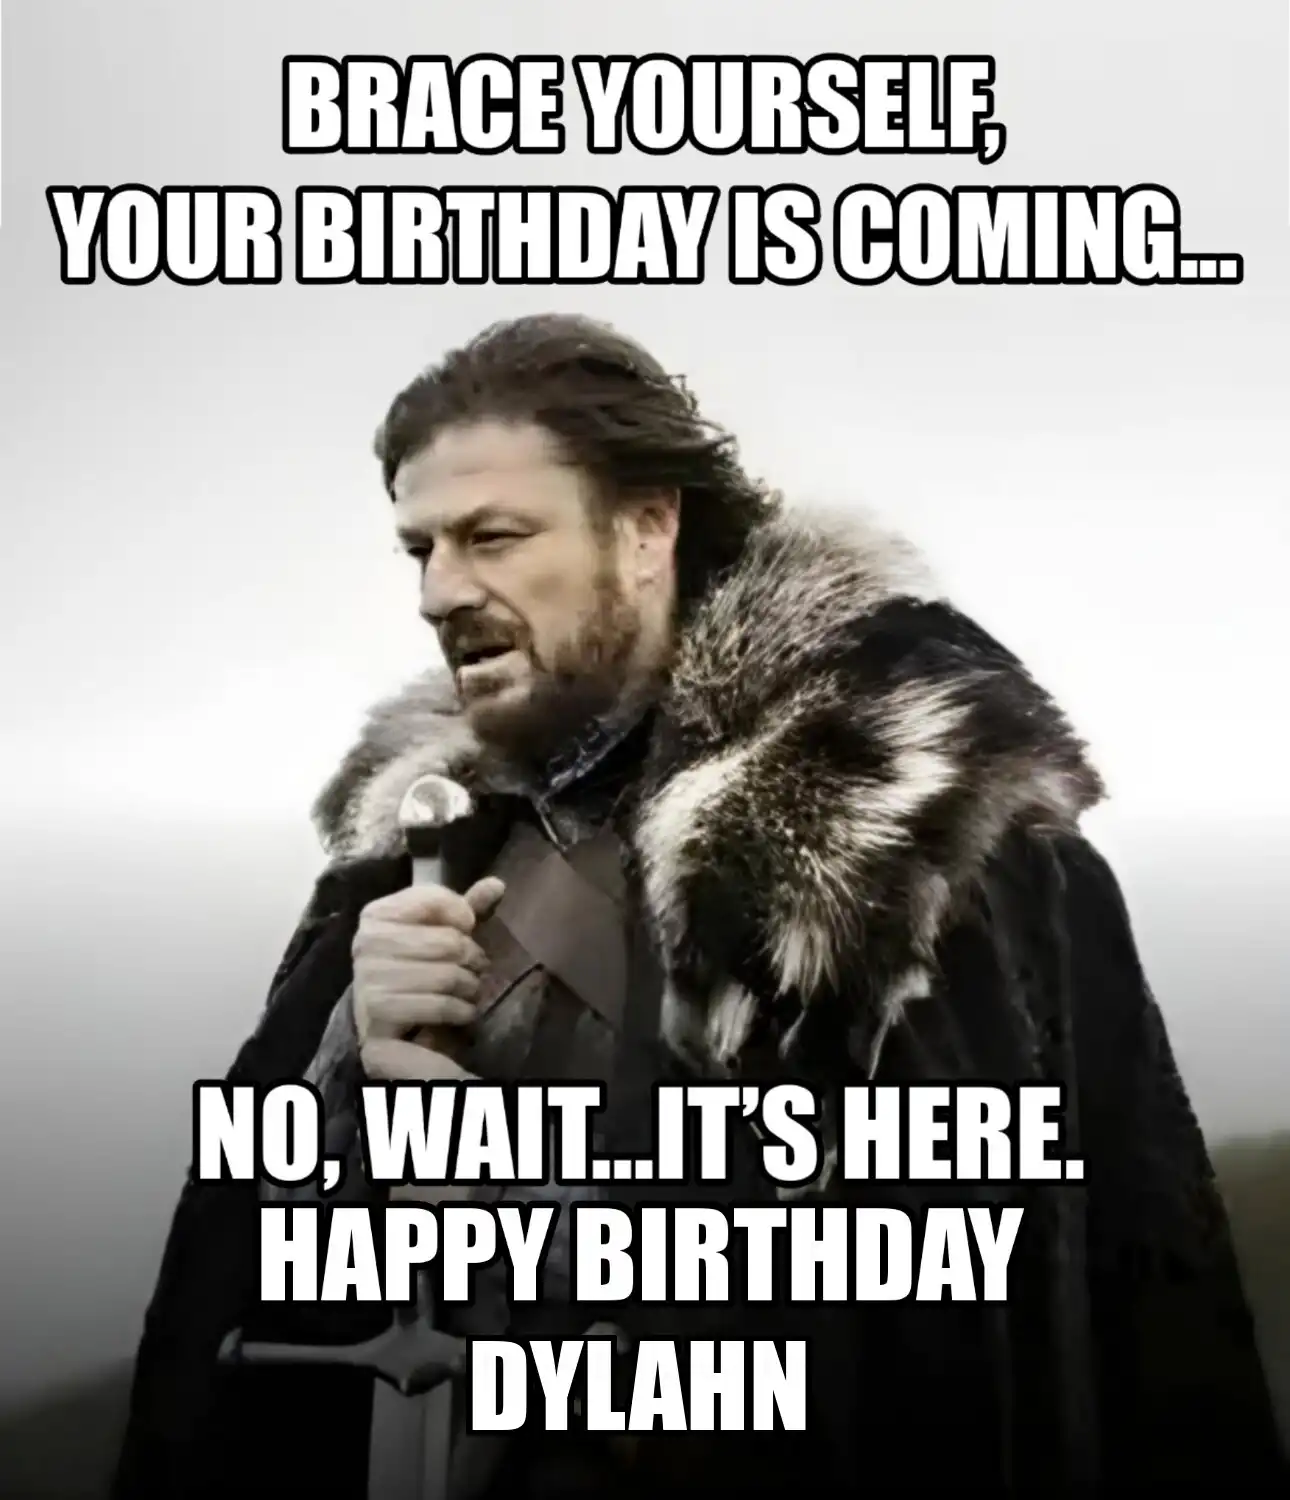 Happy Birthday Dylahn Brace Yourself Your Birthday Is Coming Meme